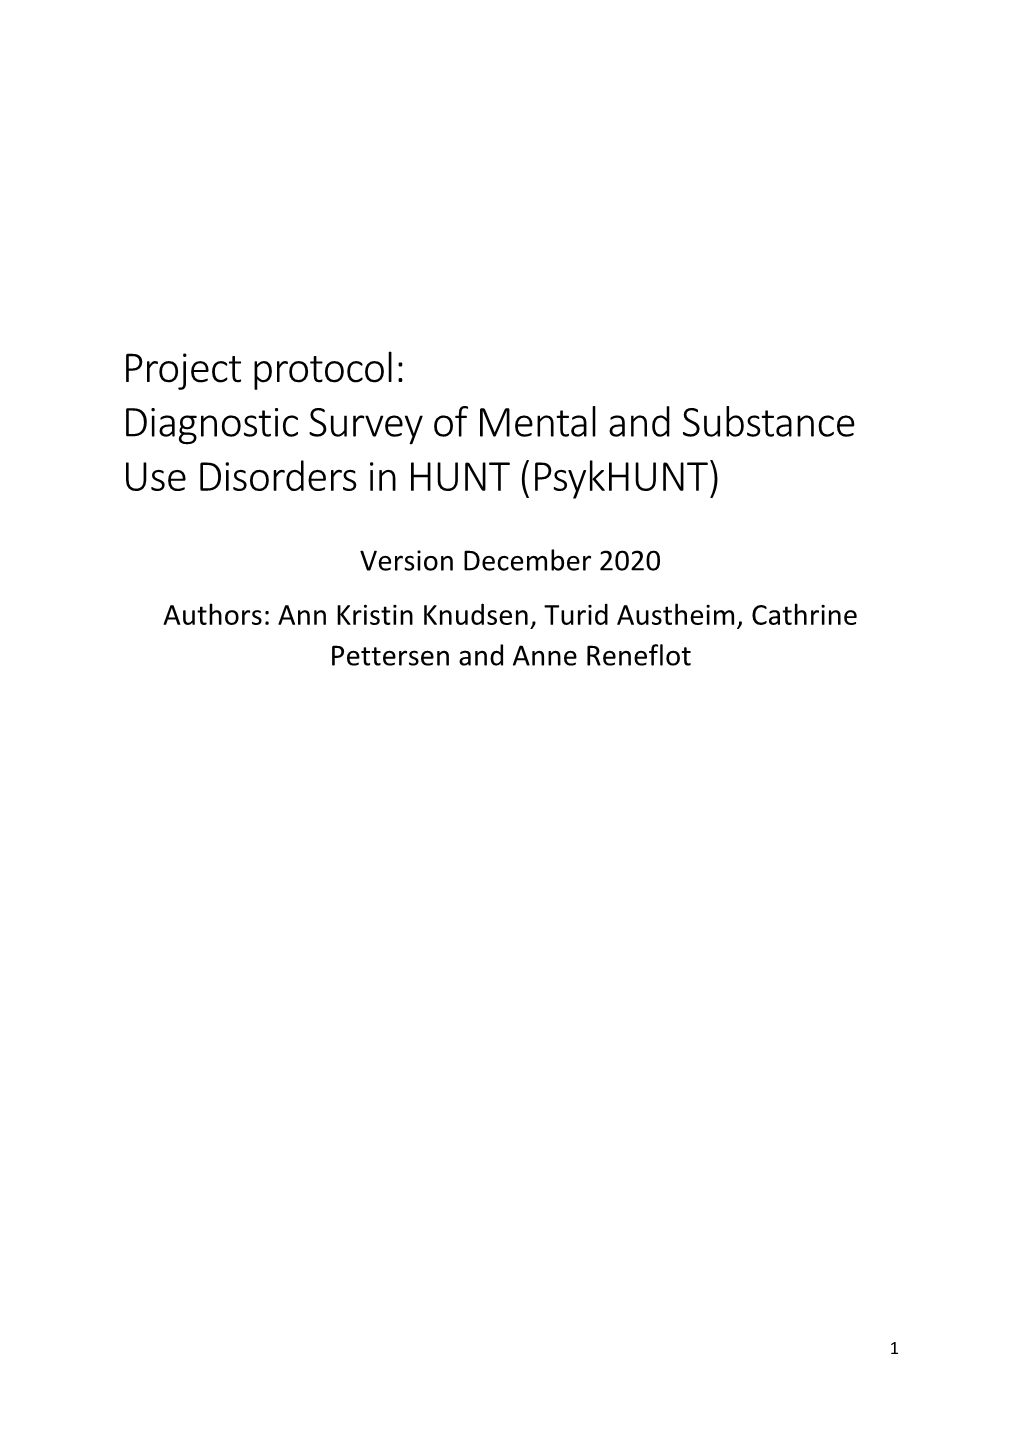 Diagnostic Survey of Mental and Substance Use Disorders in HUNT (Psykhunt)